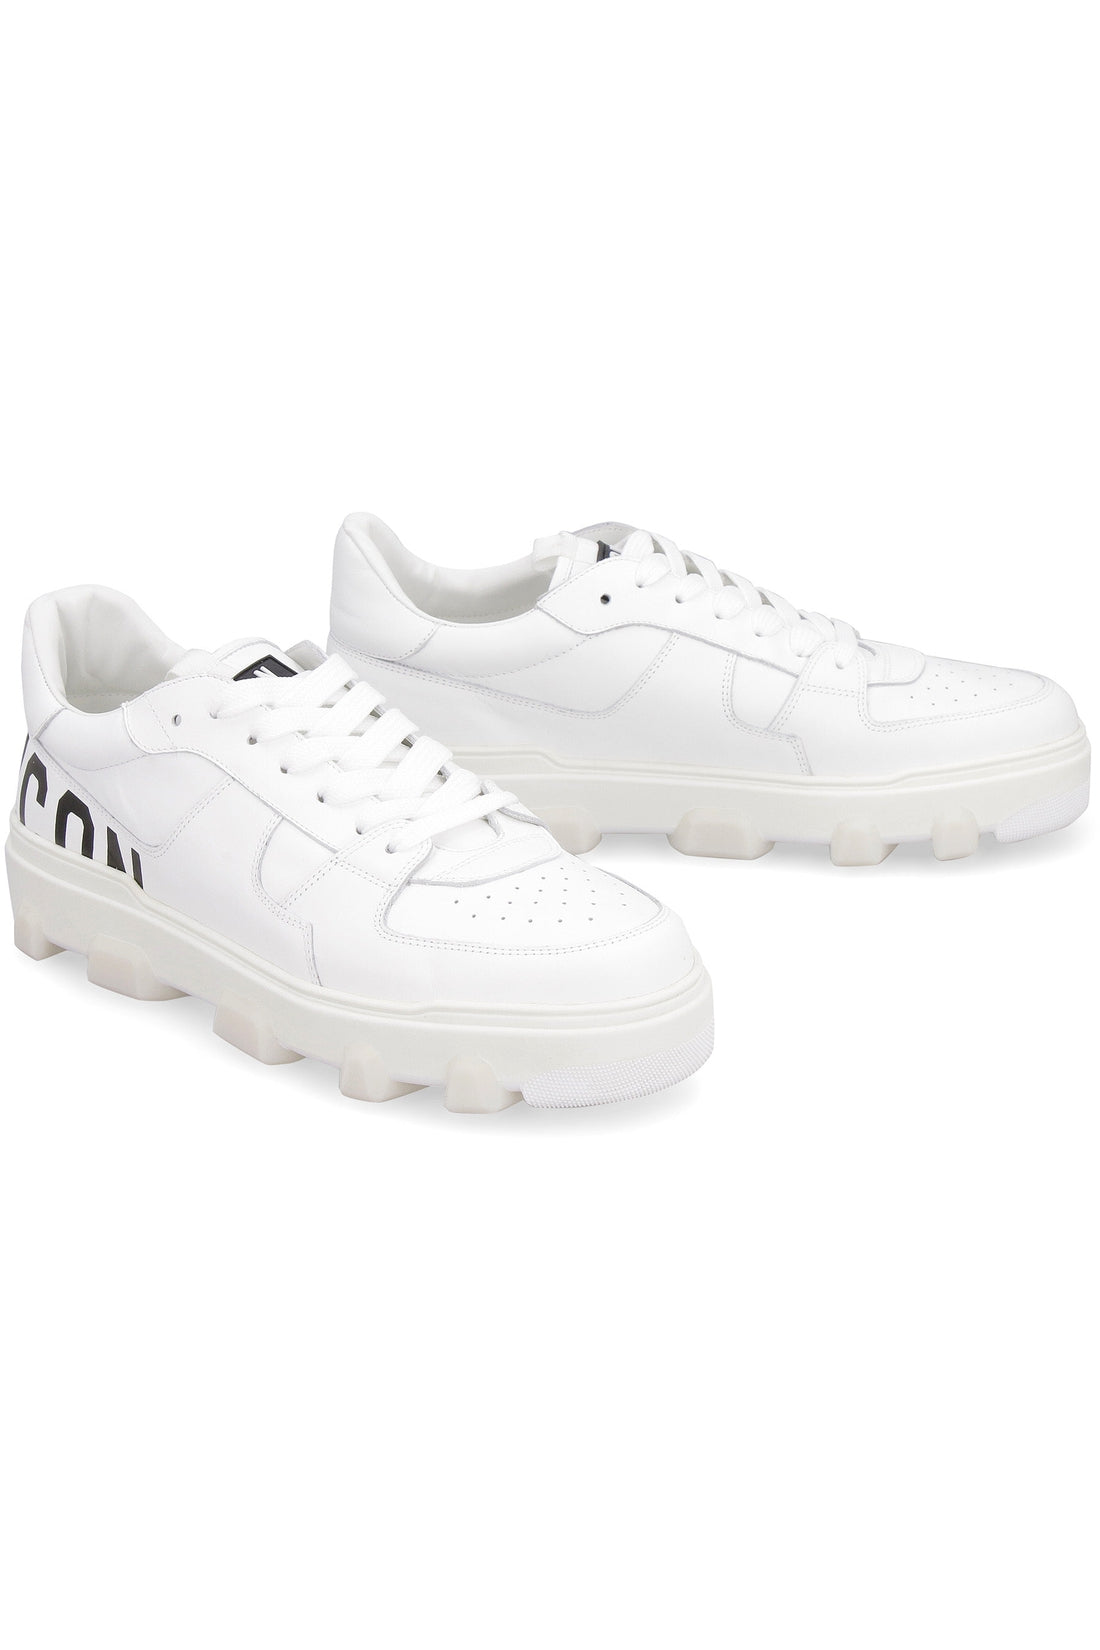 Dsquared2-OUTLET-SALE-Icon Basket leather low-top sneakers-ARCHIVIST